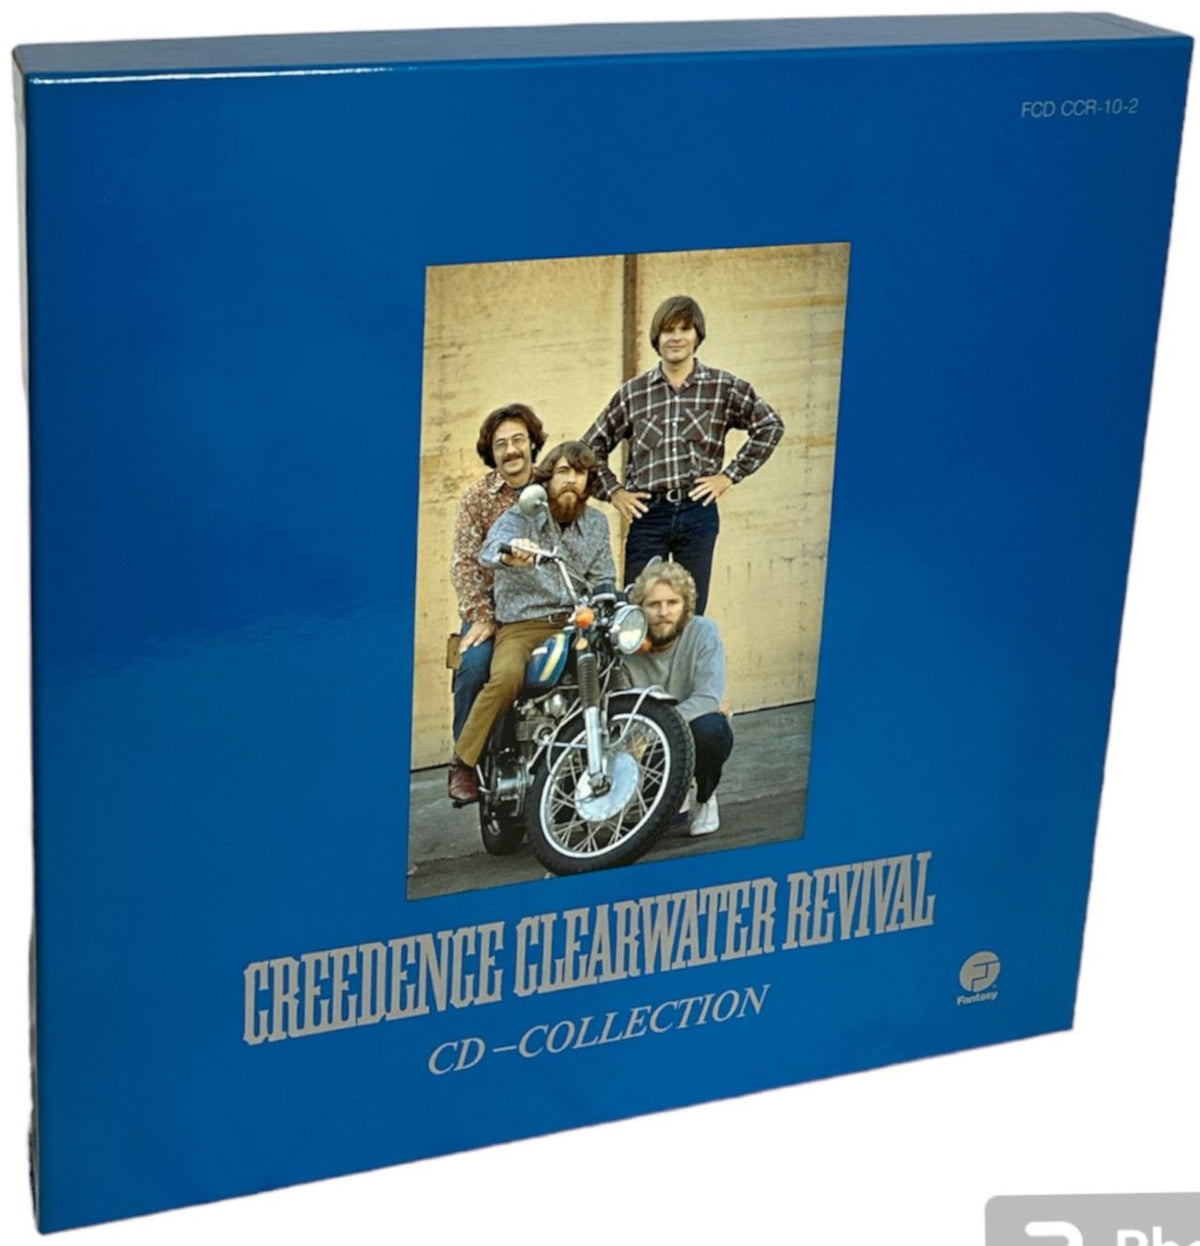 Creedence Clearwater Revival 10 CD-Collection German Cd album box set